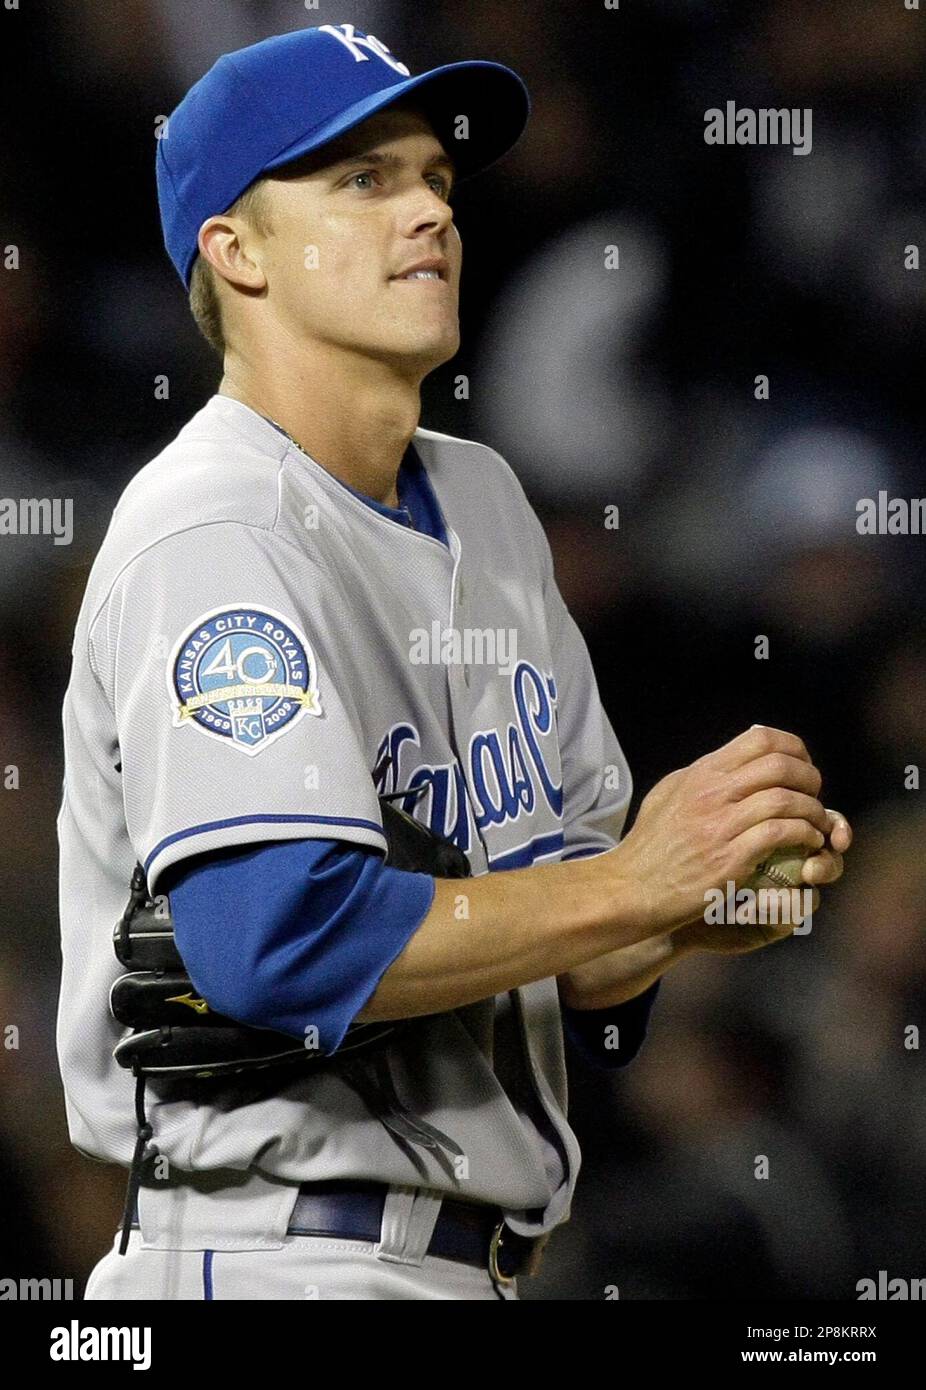 Kansas City Royals starting pitcher Zack Greinke smiles and looks at the  scoreboard after getting Chicago White Sox's Jim Thome to swing at a pitch  during the sixth inning of a baseball